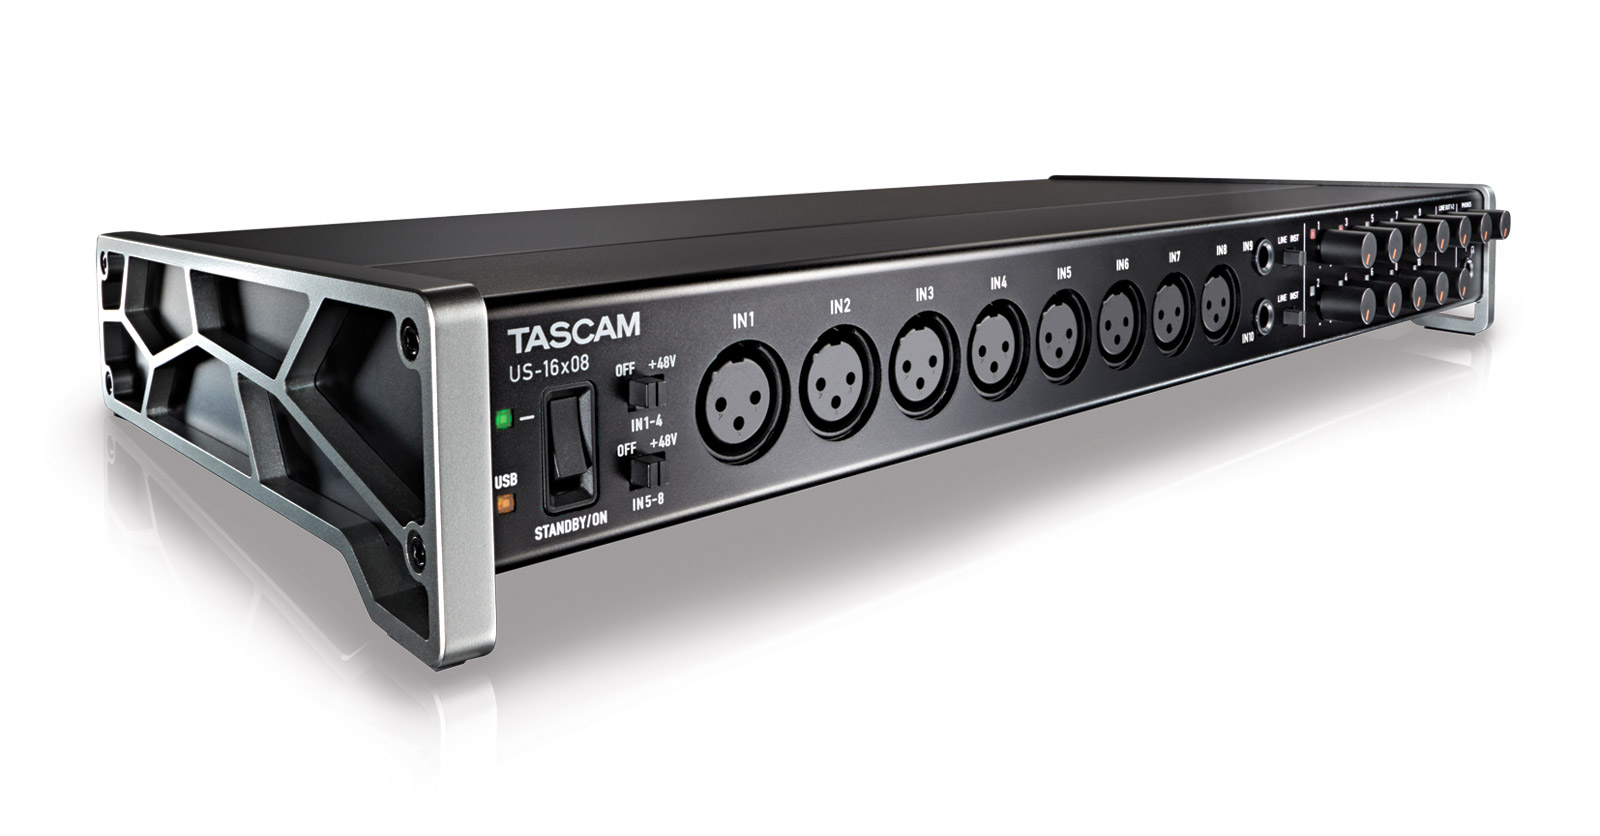 TASCAM US-16X08 USB AUDIO INTERFACE 16-in/8-out, 96kHz/24 